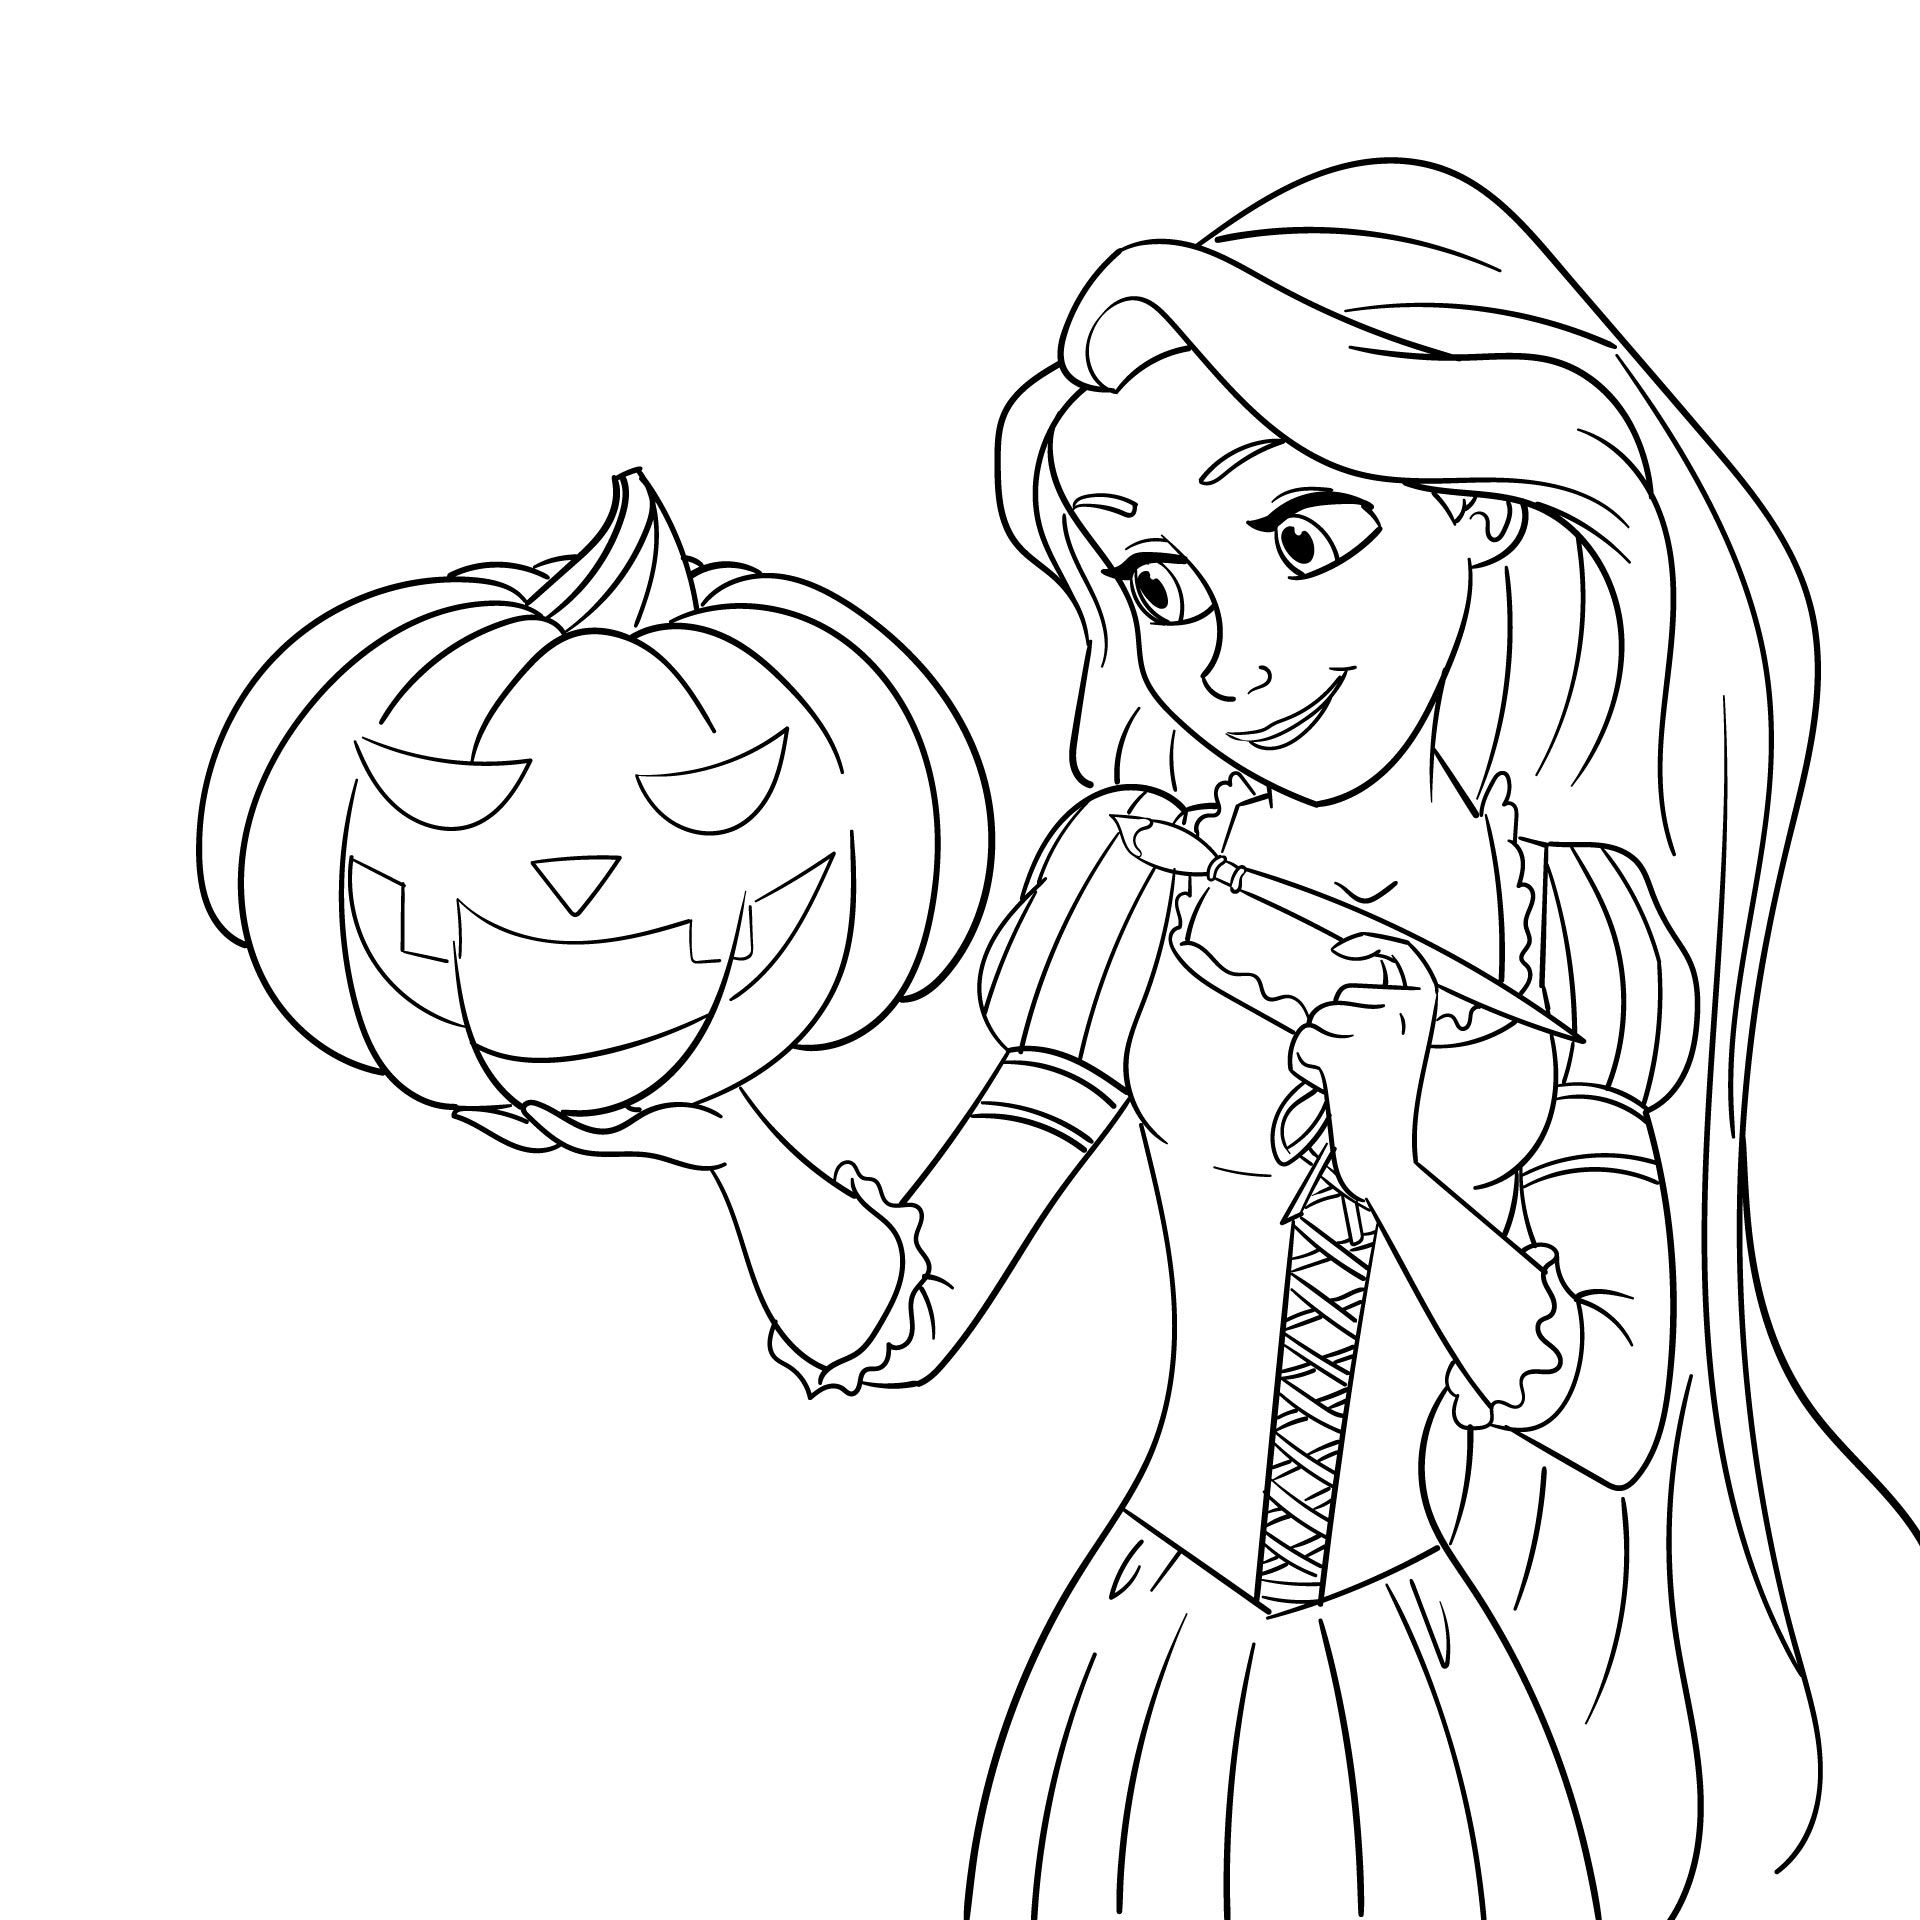 Best disney halloween coloring pages printable pdf for free at prâ halloween coloring pages halloween coloring pages printable disney princess coloring pages